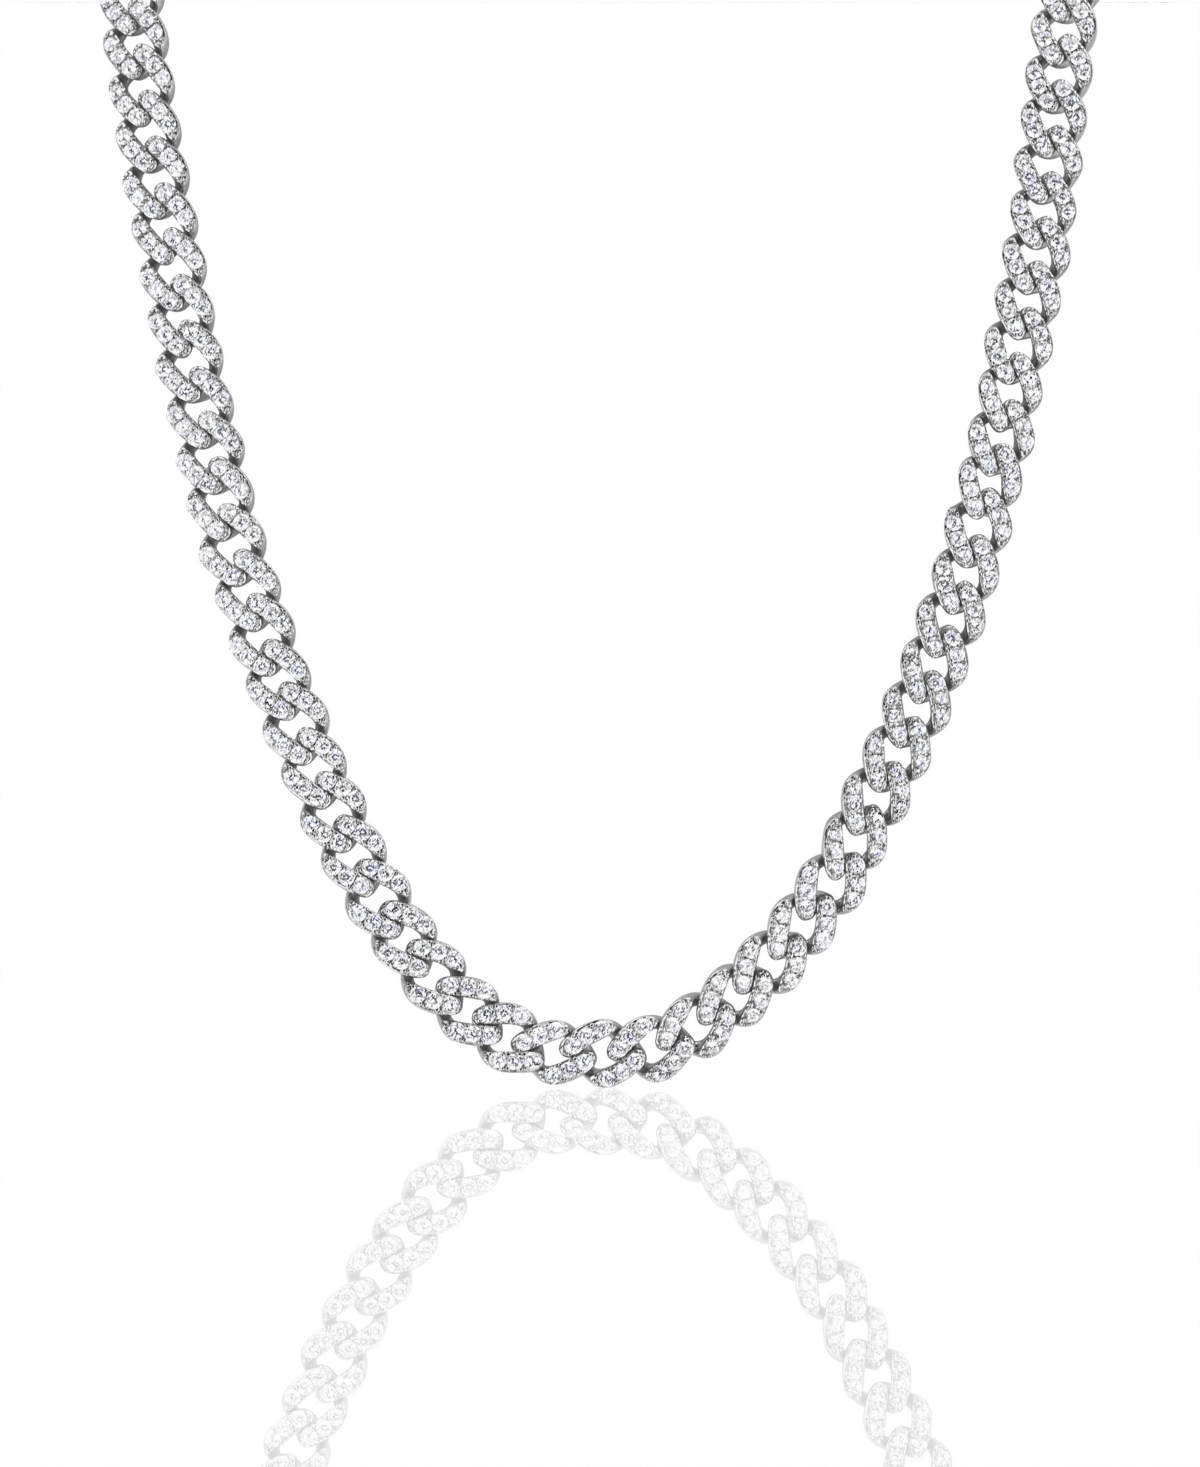 Frosty Link Collection 9mm Necklace in White Gold- Plated Brass, 16" - Silver